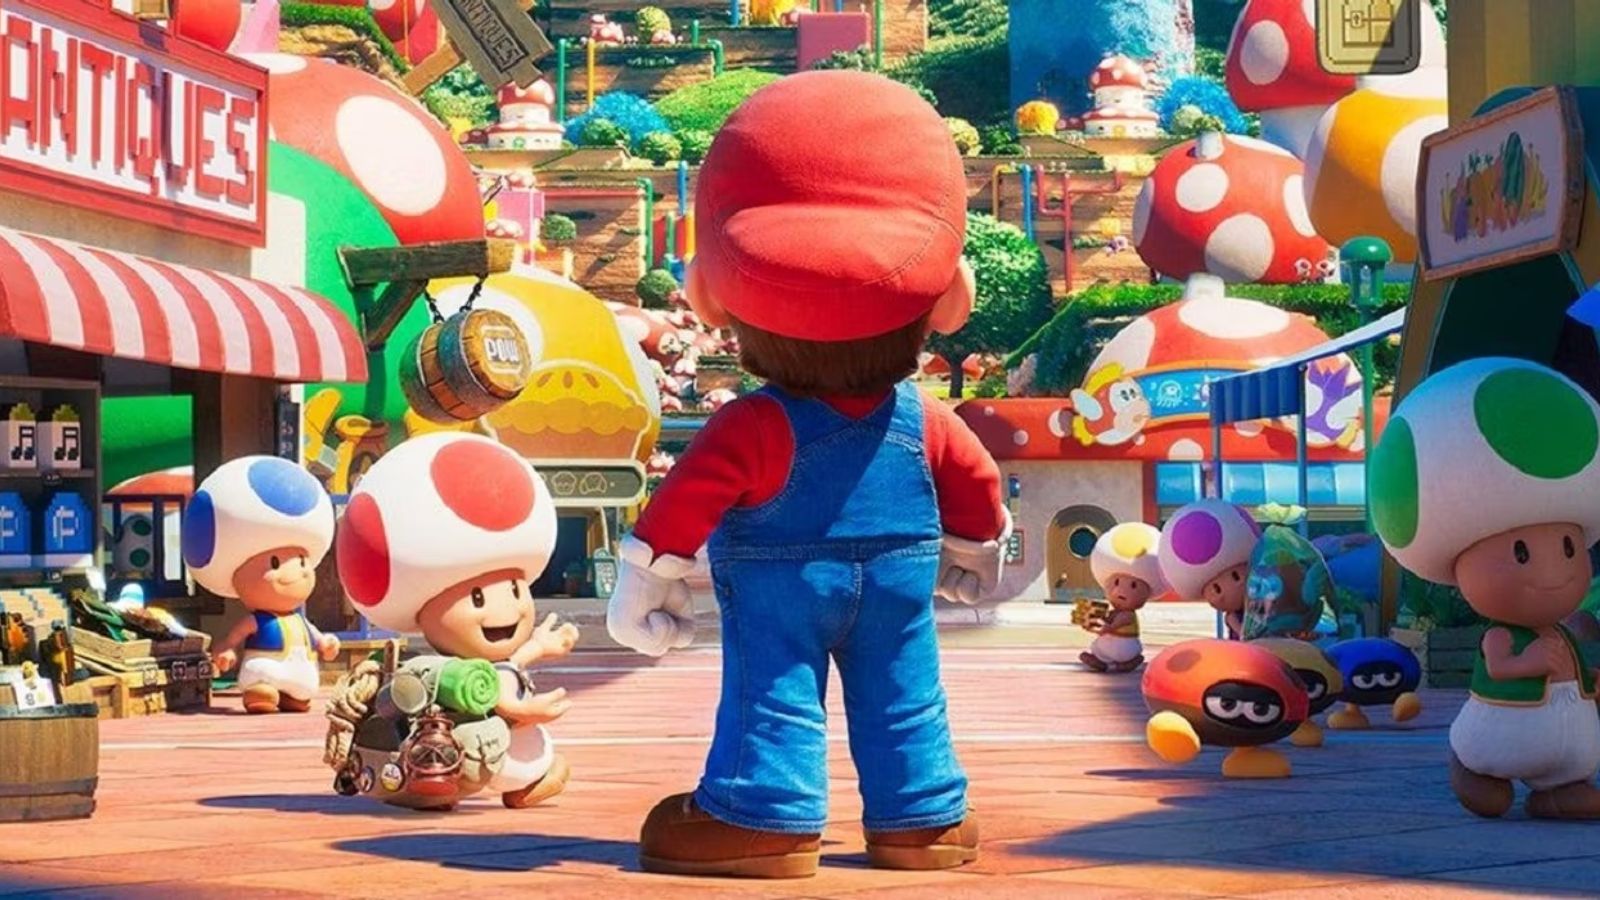 Why Is Chris Pratt's Mario's Butt So Flat In The New Movie Poster?